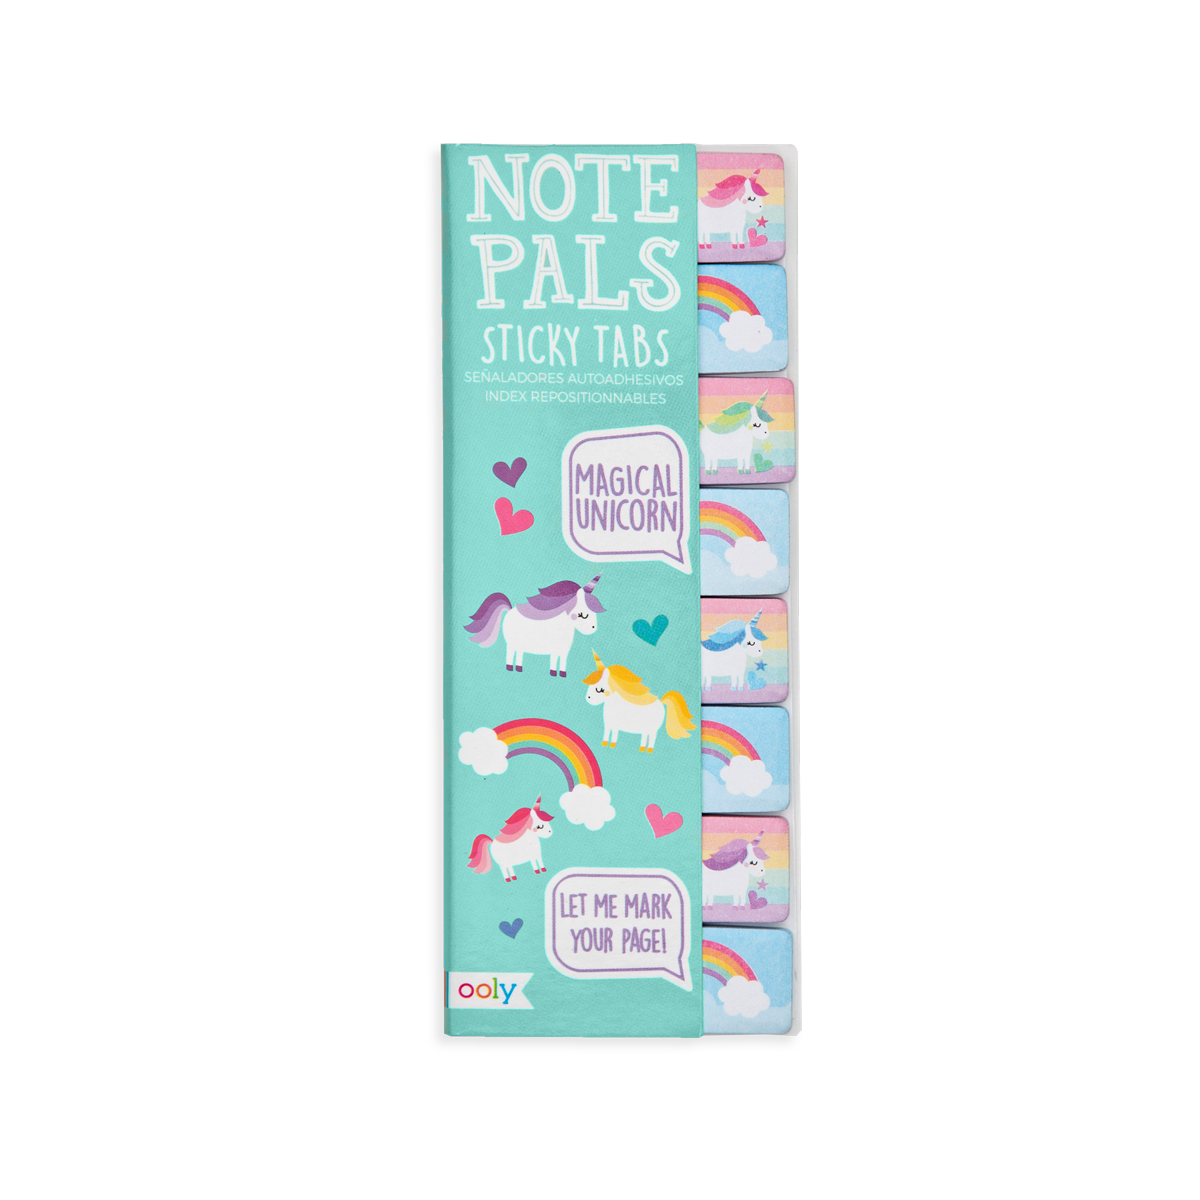 Note Pals Sticky Tabs - Magical Unicorns